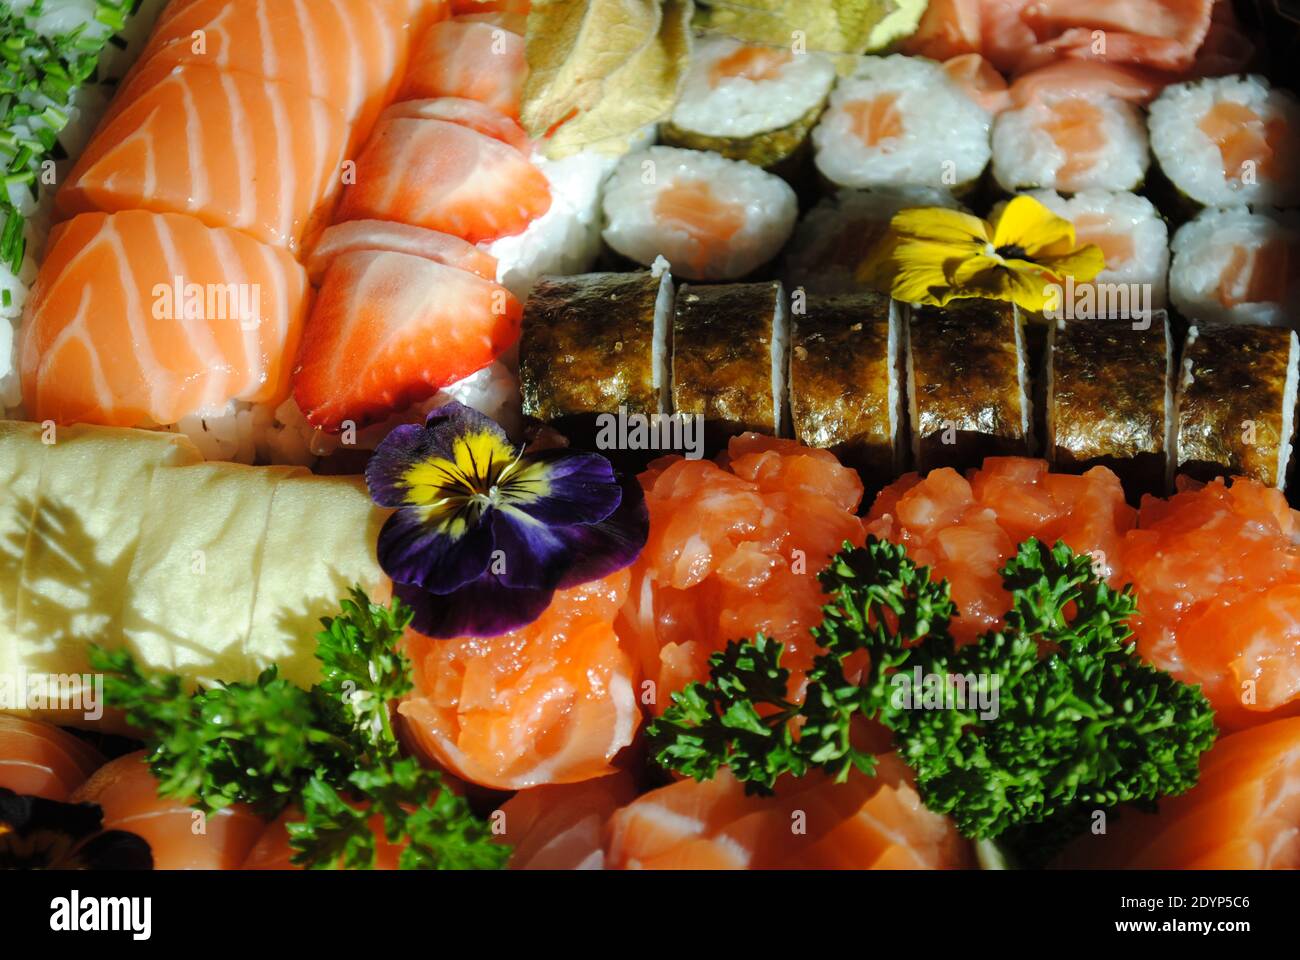 A display of freshly prepared sushi pieces ready to be enjoyed. Stock Photo